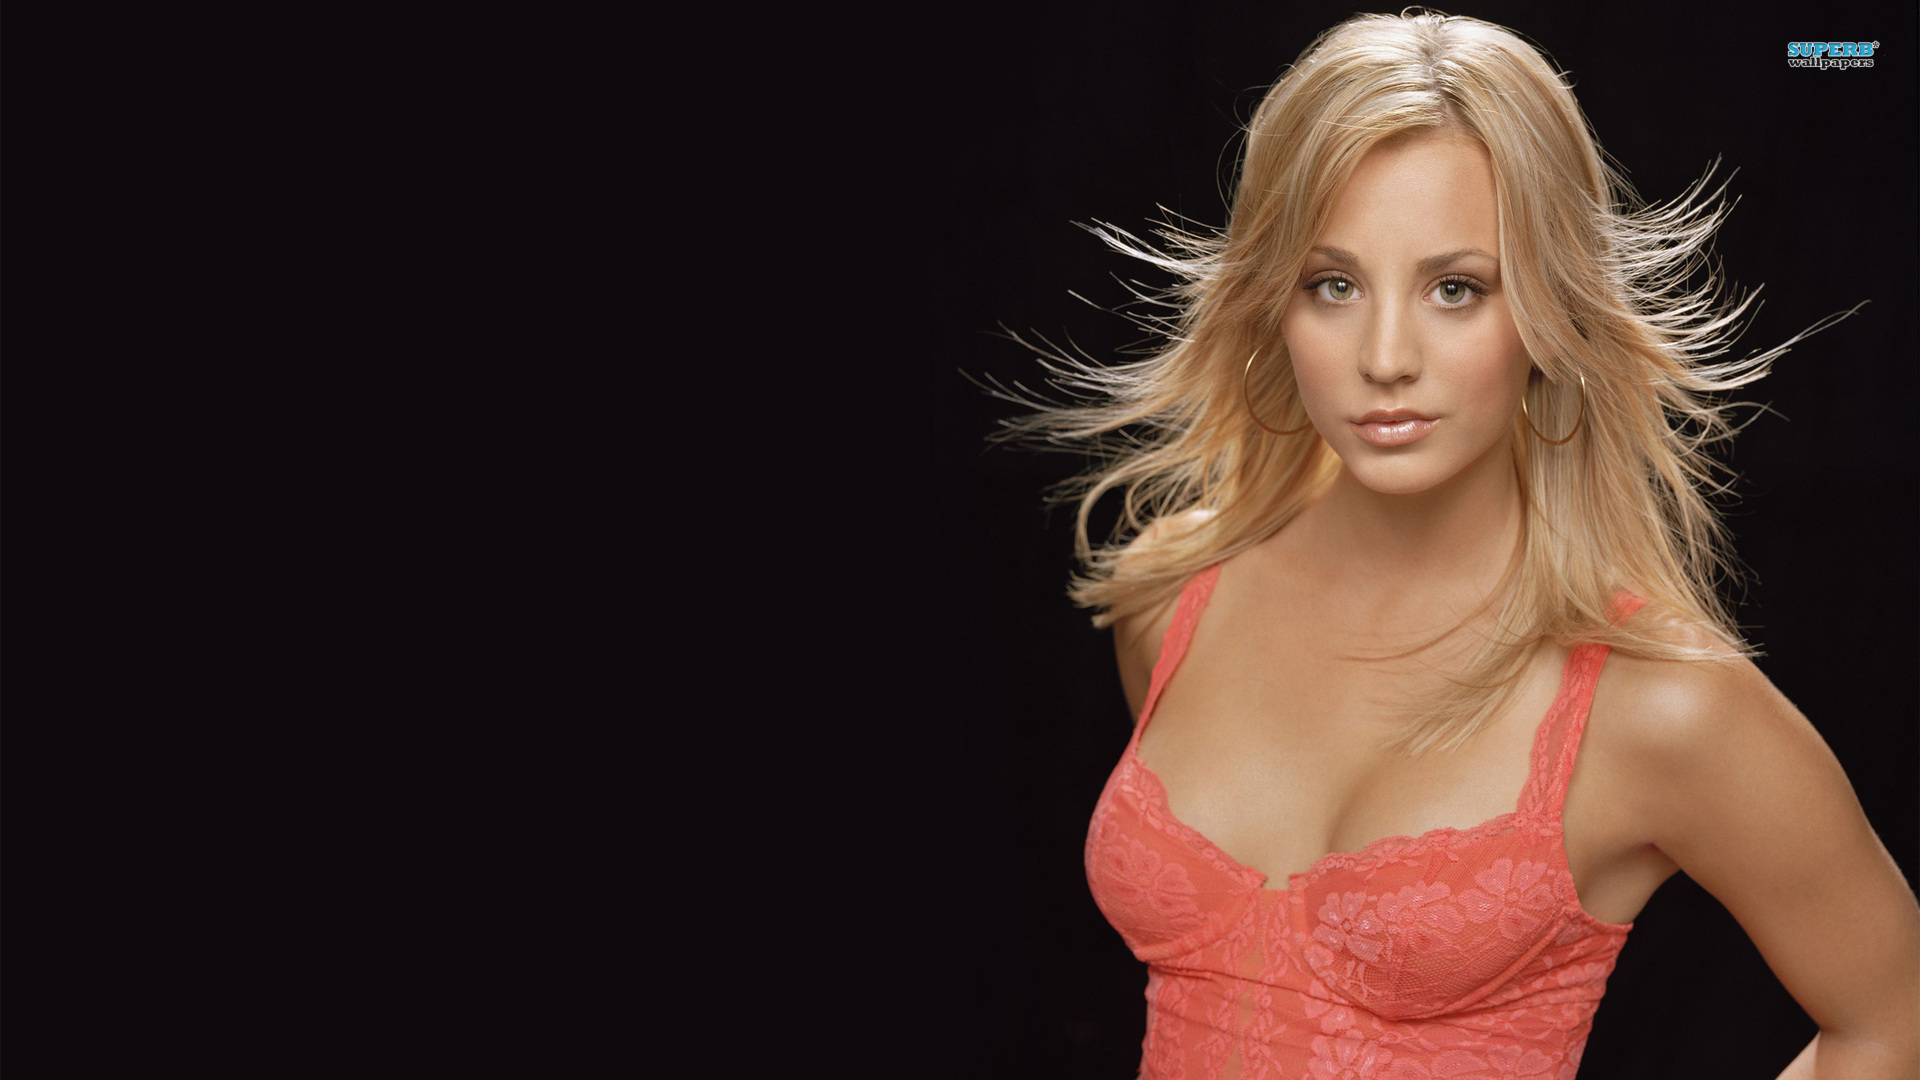 Kaley Cuoco Wallpaper Pictures Image